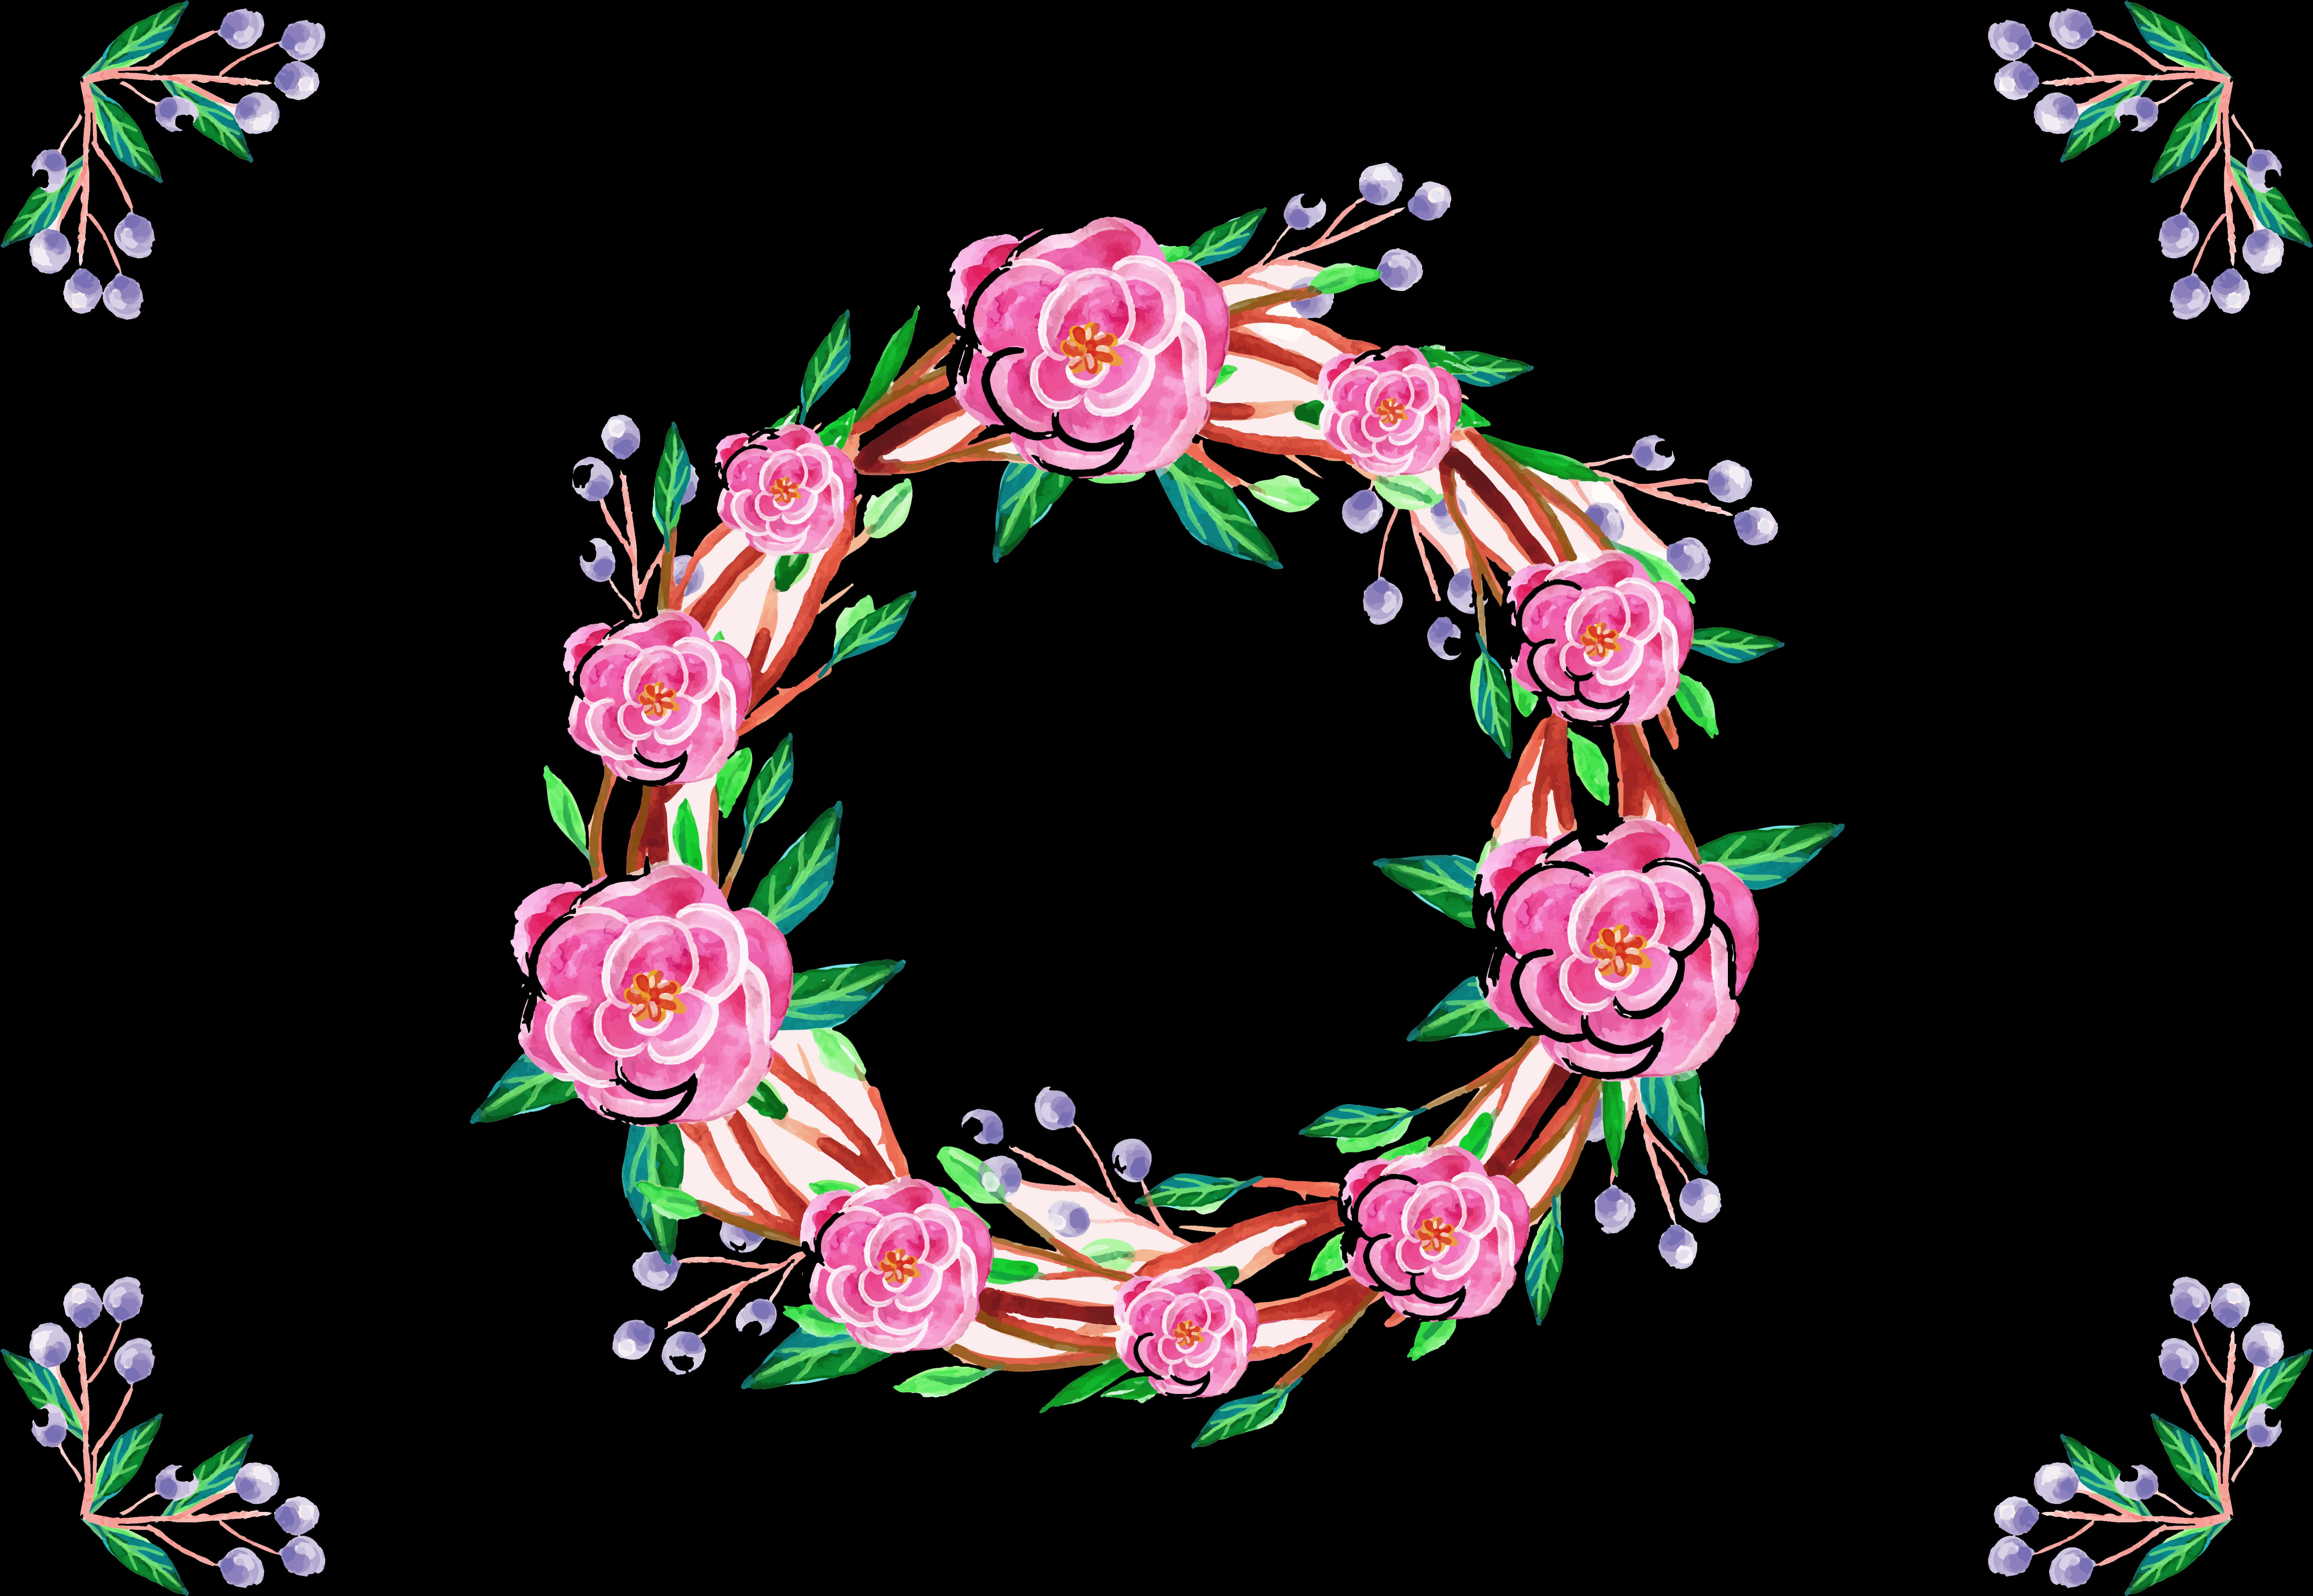 A Wreath Of Pink Flowers And Leaves